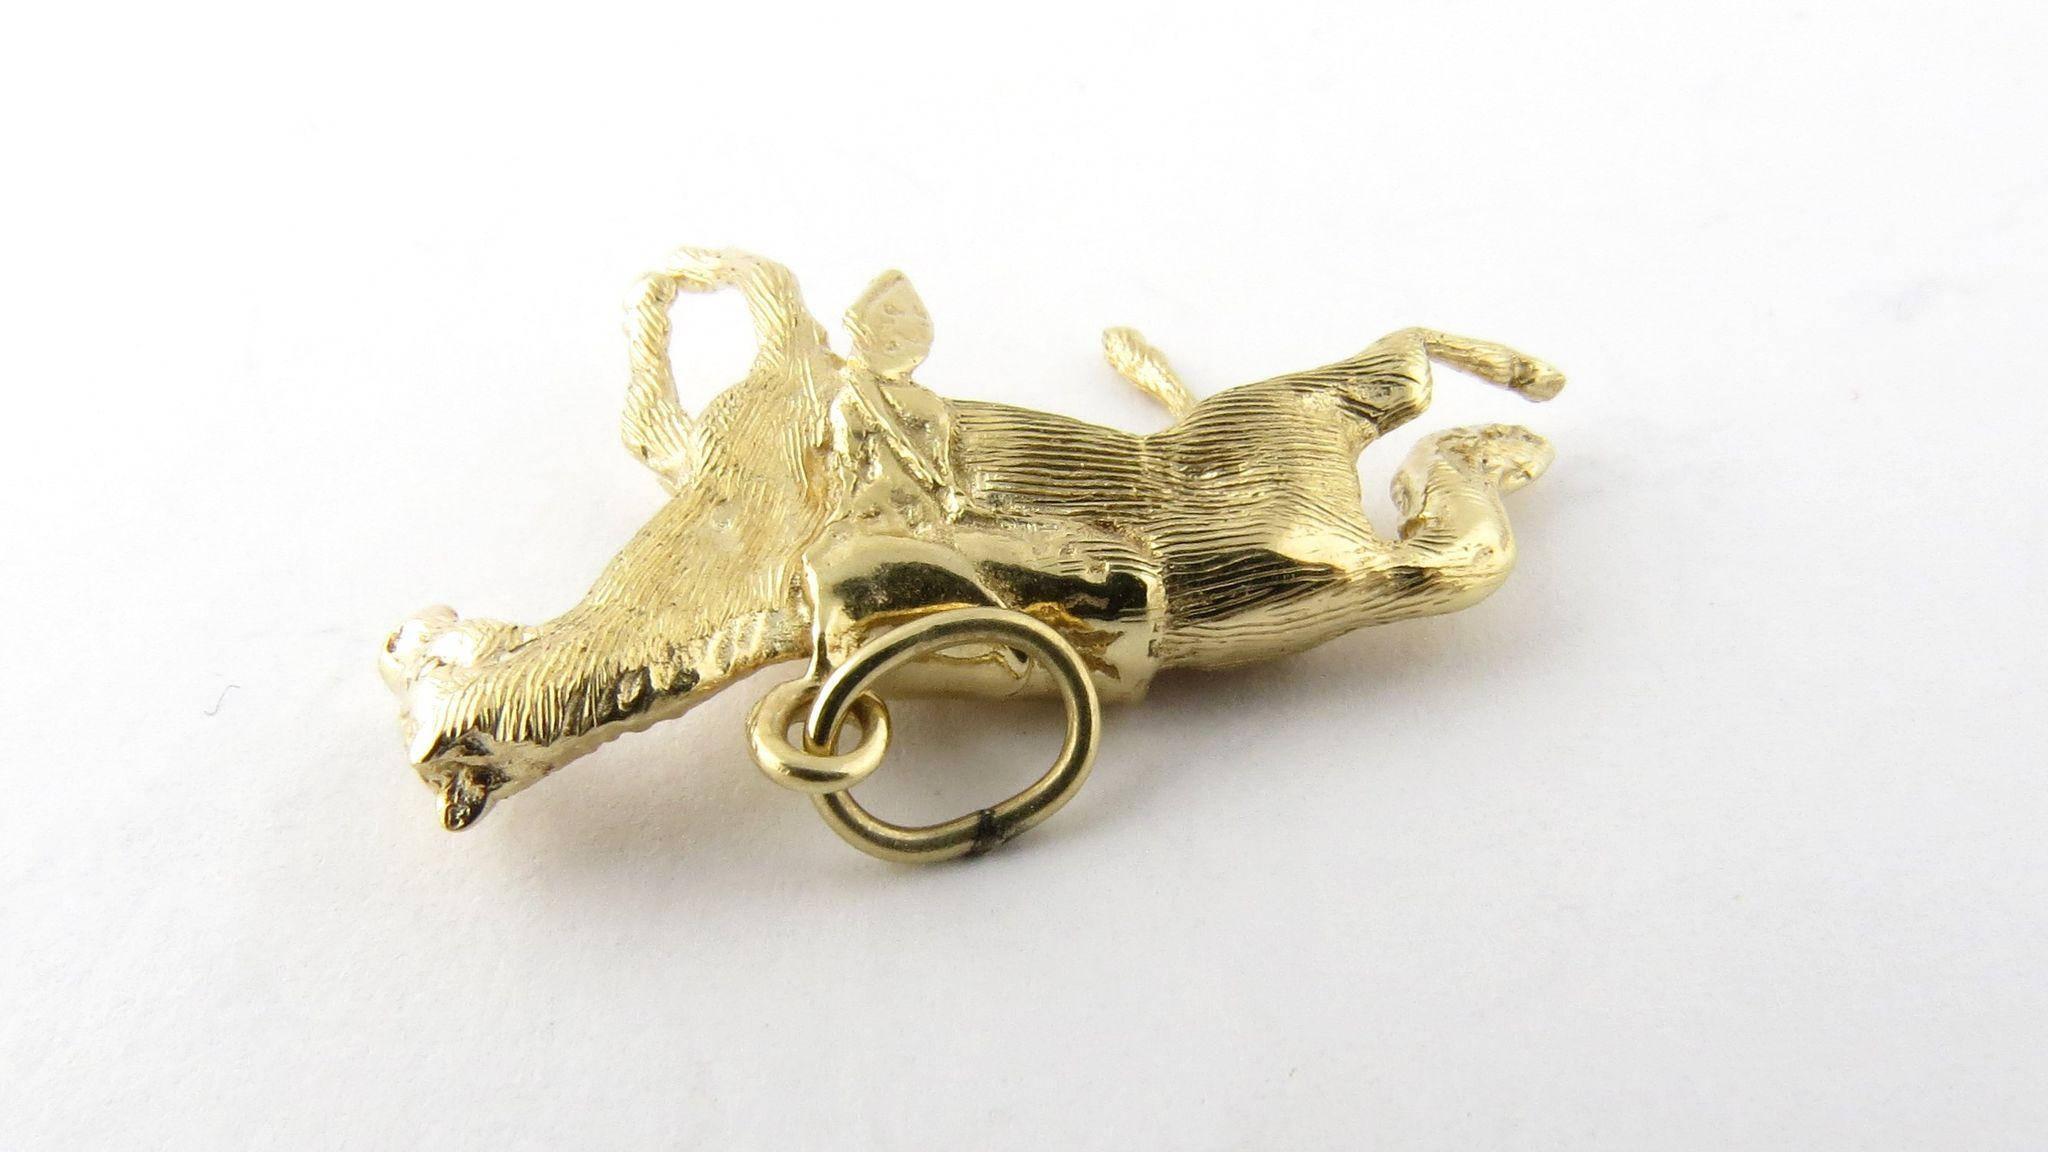 Vintage 14 Karat Yellow Gold Horse Charm- 

This proud stallion complete with saddle is poetry in motion! 

Size: 19mm x 29mm (actual charm) 

Weight: 3.7 dwt. / 5.7 gr. 

Hallmark: 14K M & M 

Very good condition, professionally polished. 

Will